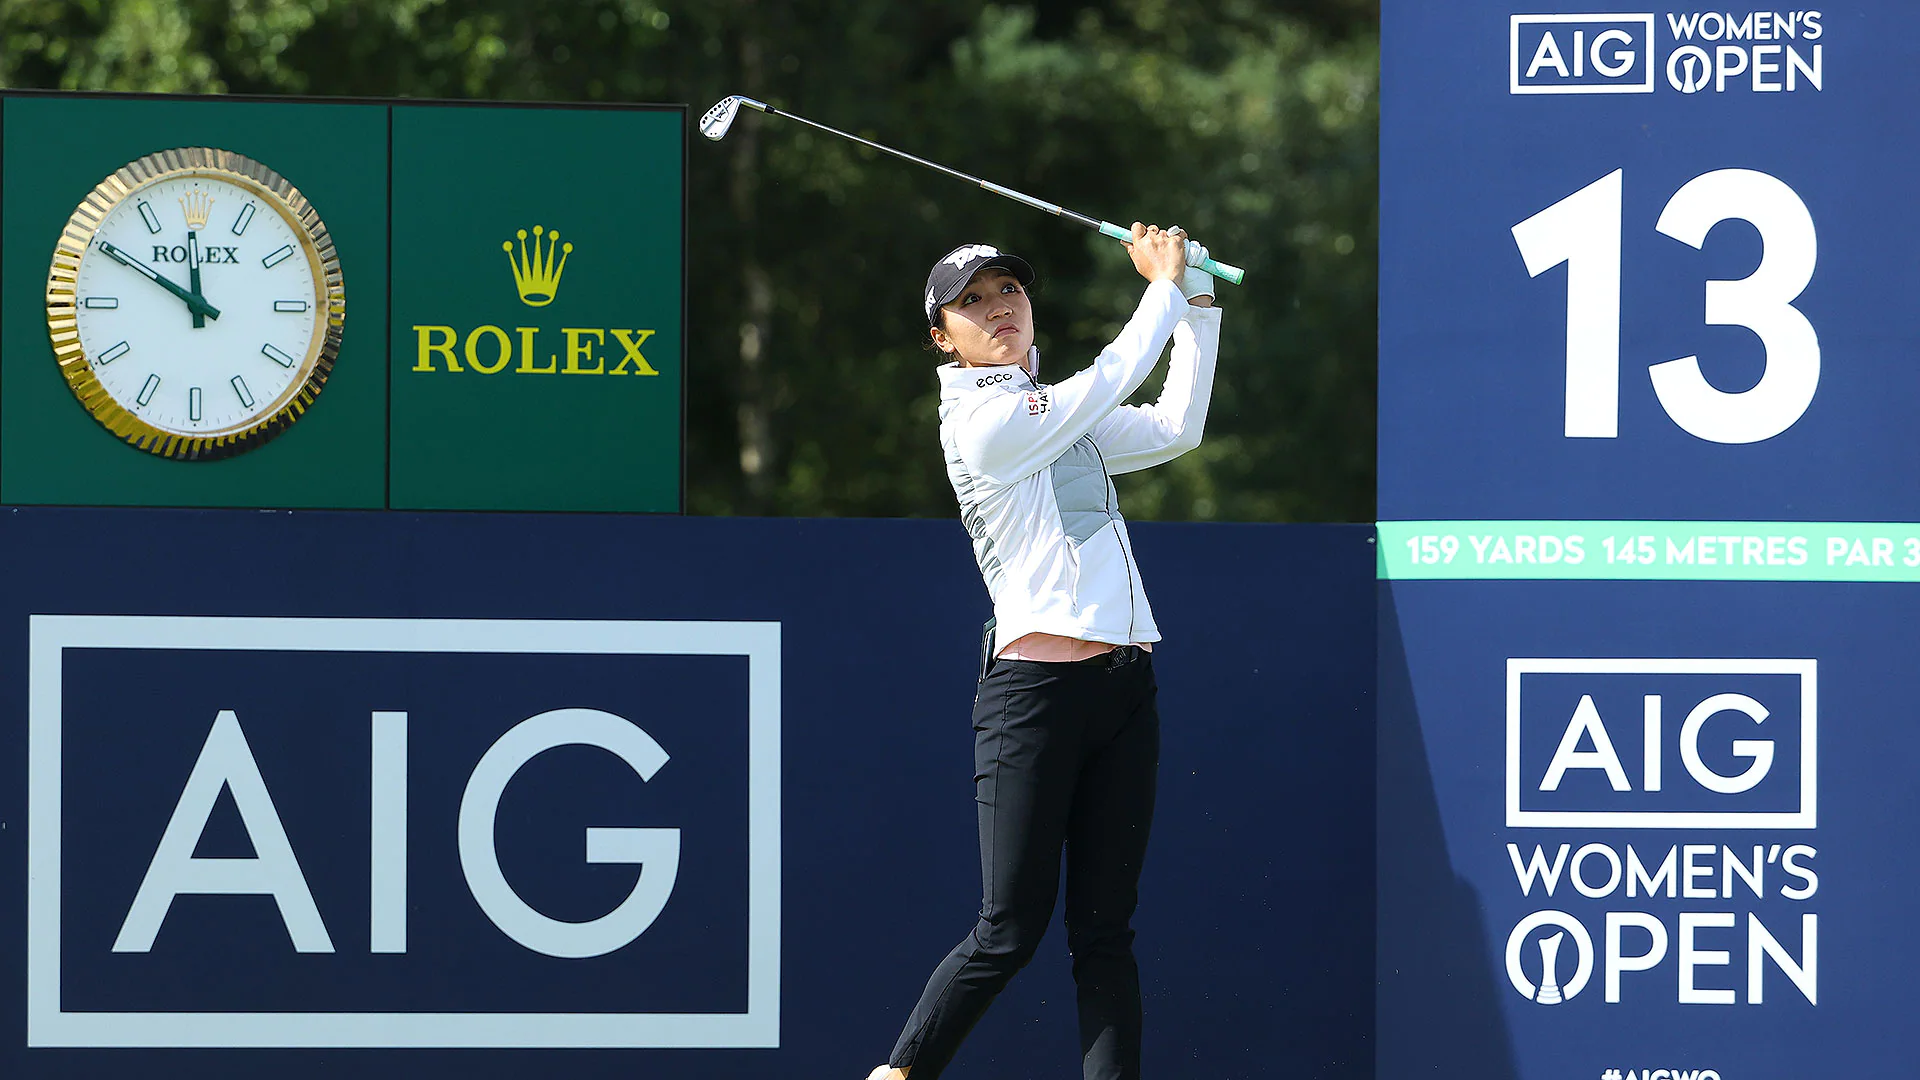 AIG Women’s Open increases purse to become richest prize in women’s majors